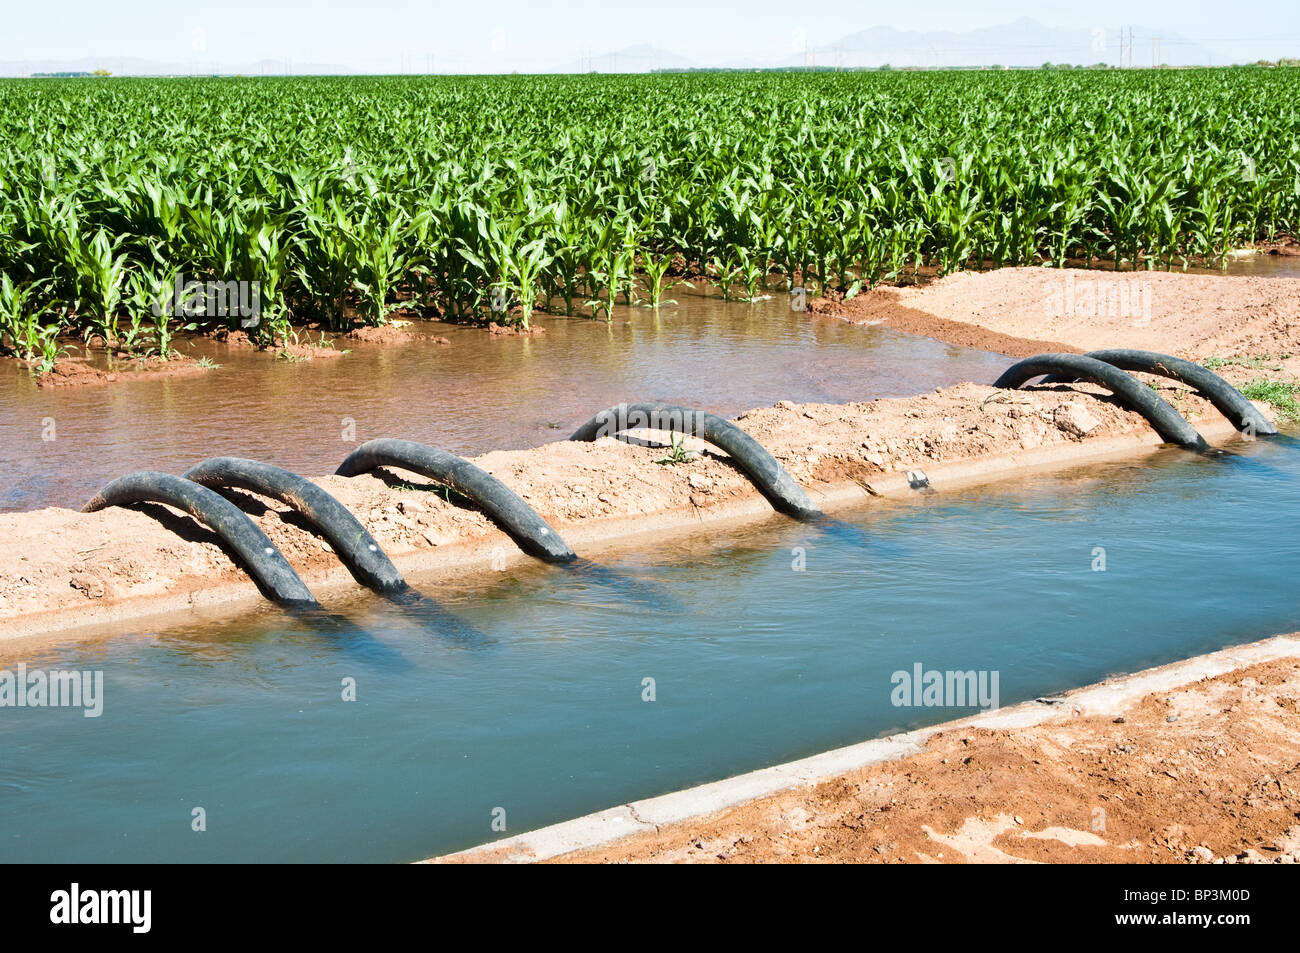 Water is siphoned from an irrigation canal to flood a corn field in Arizona. Stock Photo